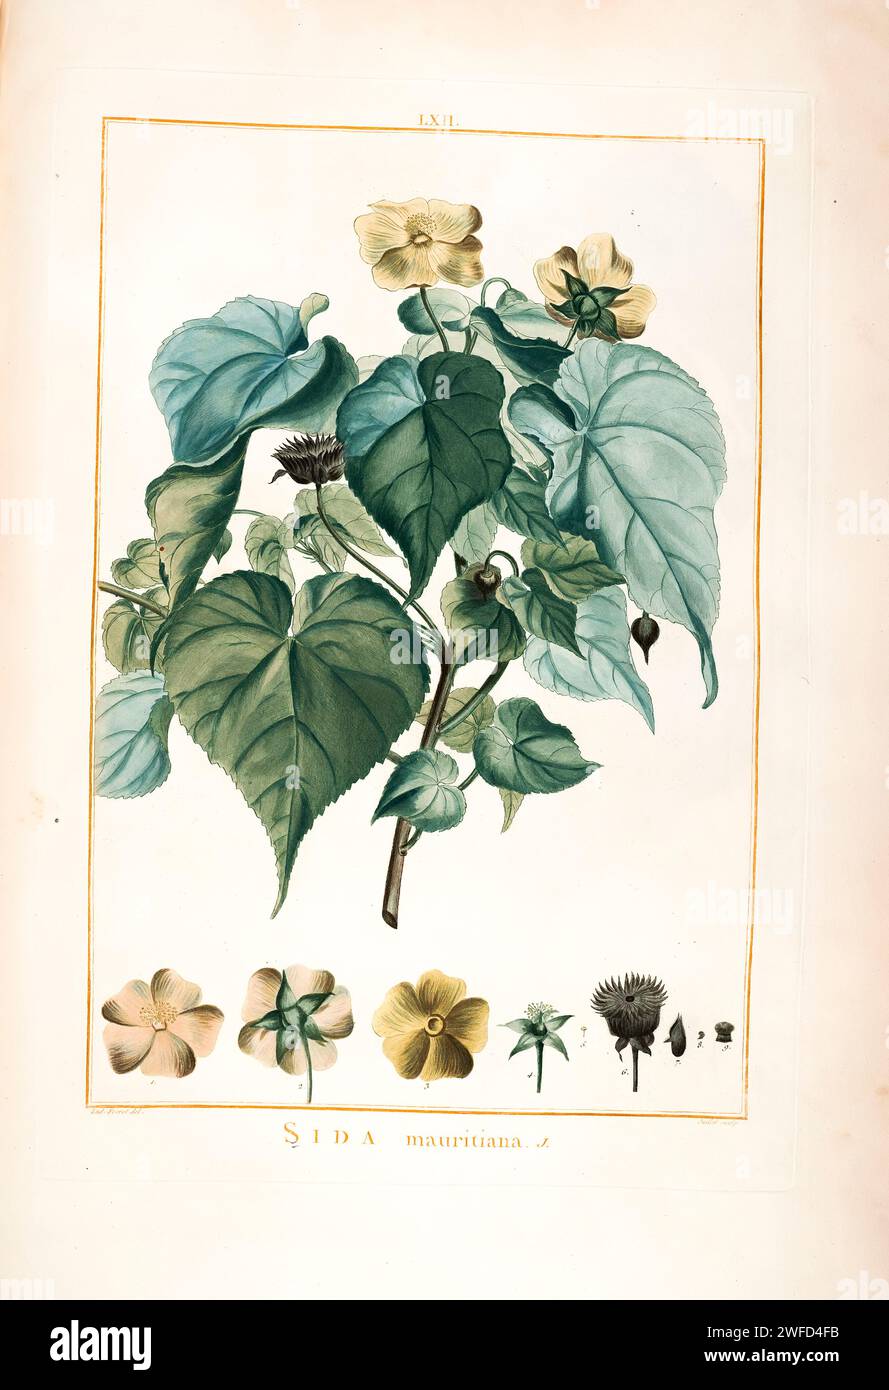 Sida mauritiana syn Abutilon mauritianum Hand Painted by Pierre-Joseph Redouté and published in Stirpes Novae aut Minus Cognitae (1784) by Charles Louis L'Héritier de Brutelle. Abutilon is a large genus of flowering plants in the mallow family, Malvaceae. It is distributed throughout the tropics and subtropics of the Americas, Africa, Asia, and Australia. General common names include Indian mallow and velvetleaf; ornamental varieties may be known as room maple, parlor maple, or flowering maple Stock Photo